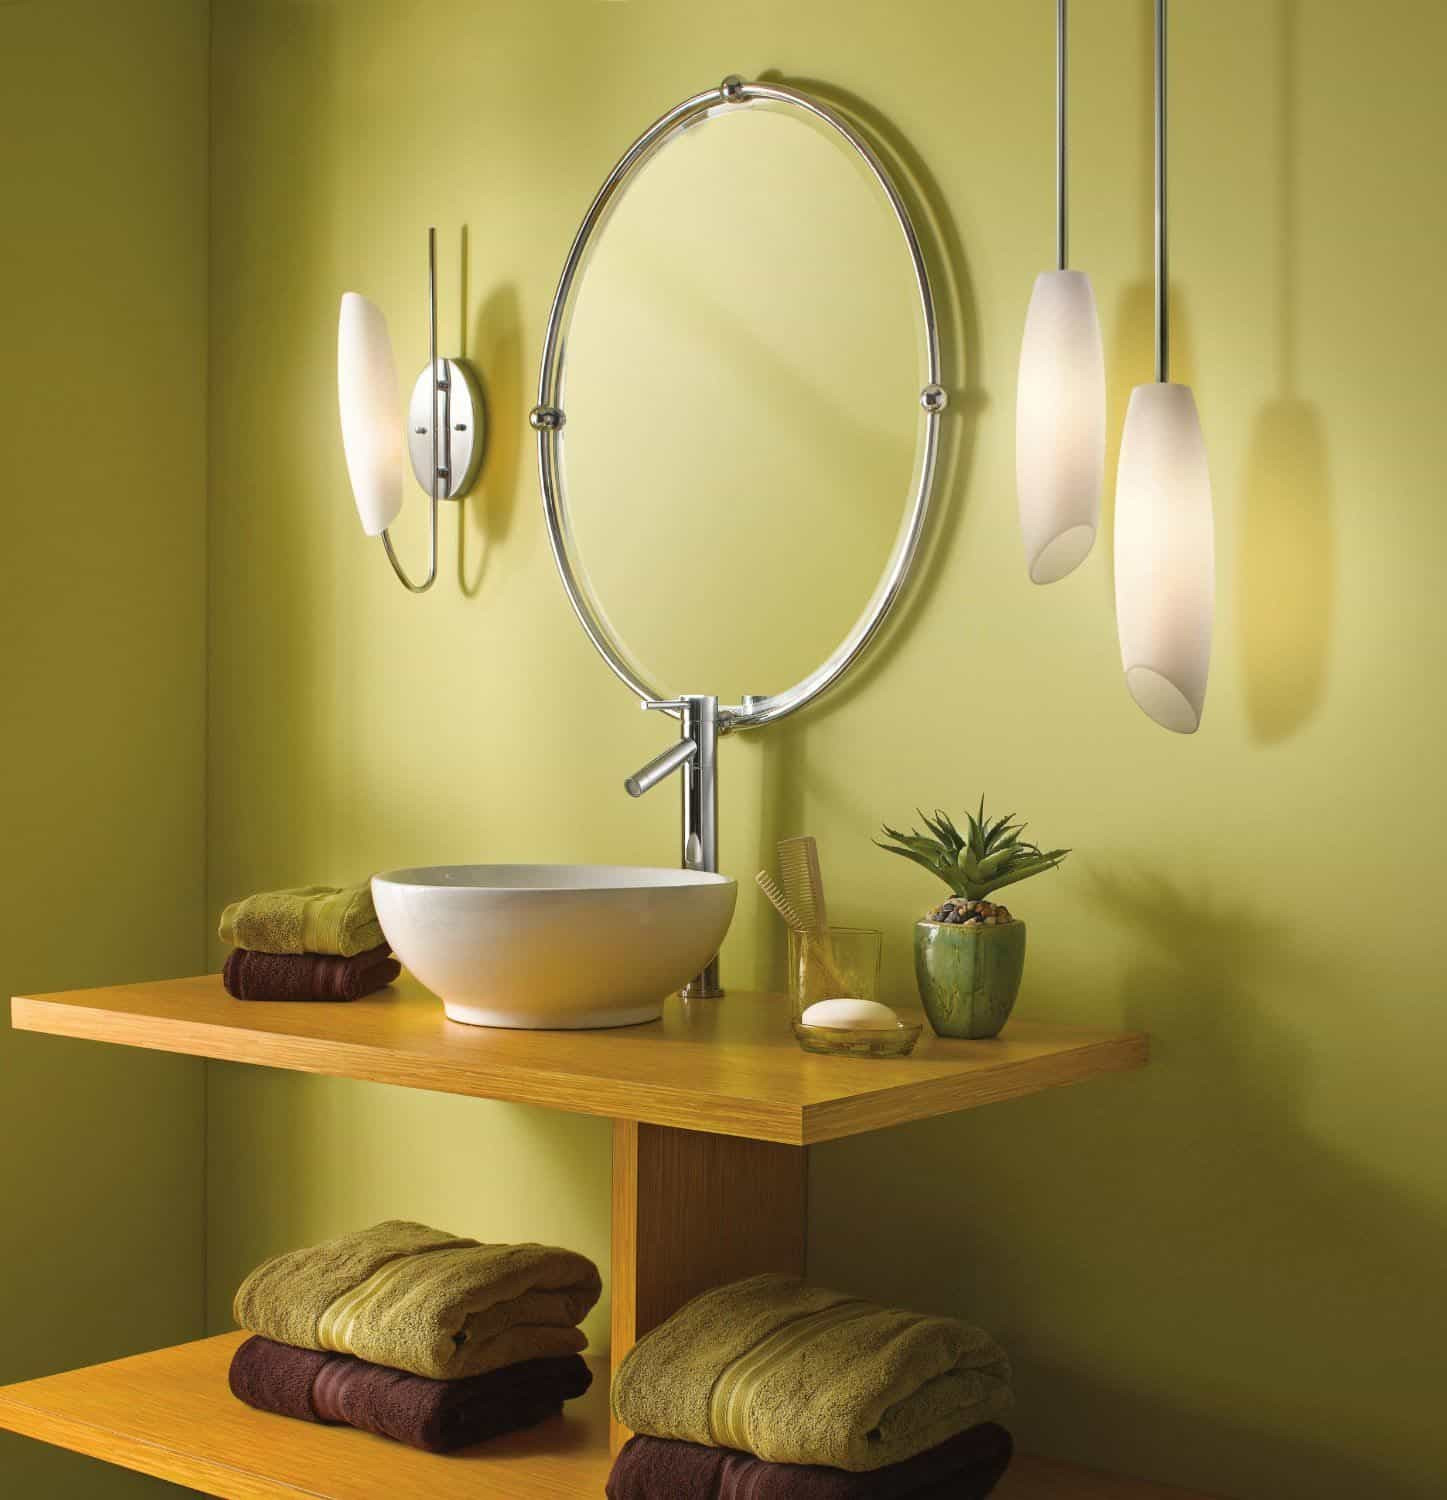 Wall Sconces For Bathroom Vanity
 Bathroom With Hanging Pendants And Wall Sconce Good